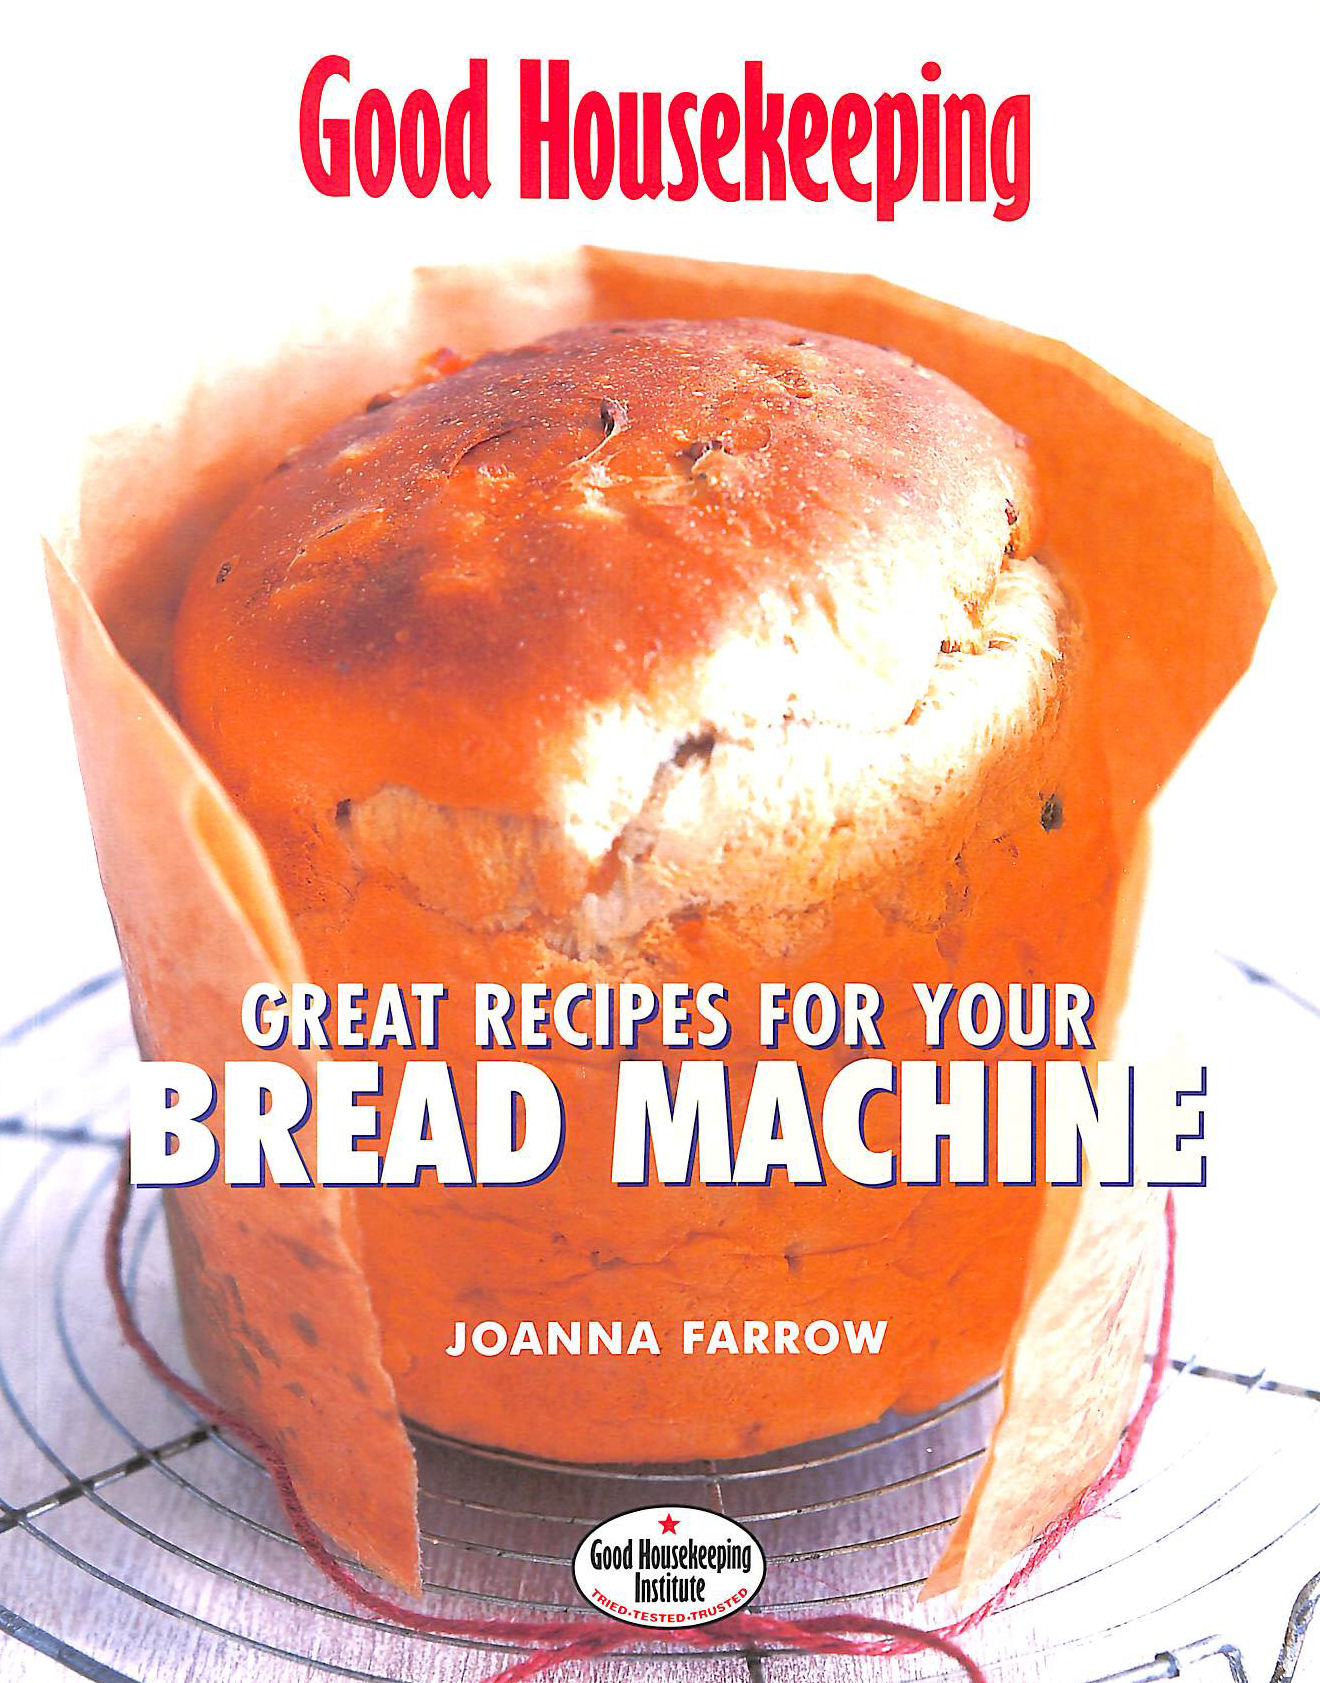 FARROW, JOANNA - Good Housekeeping: Great Recipes for Your Bread Machine